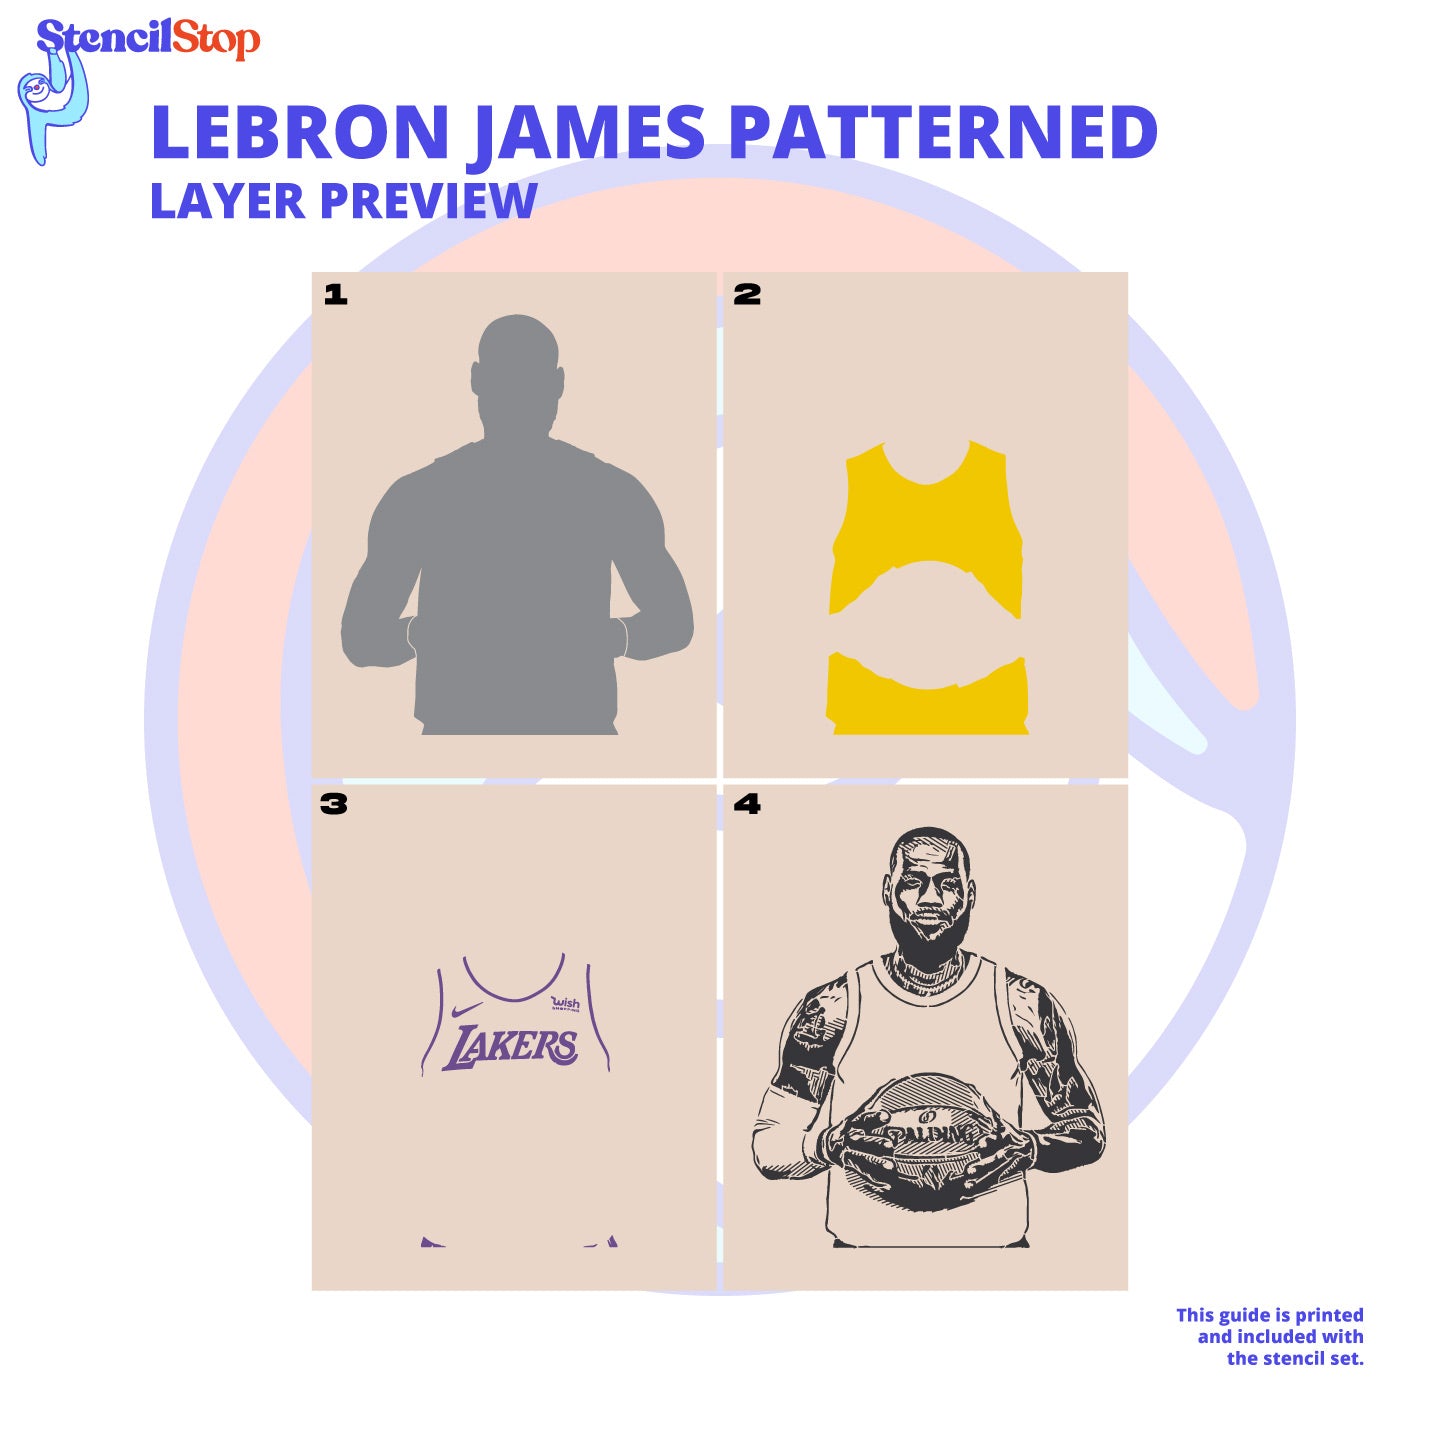 Lebron James "Patterned" Layered Stencil Preview